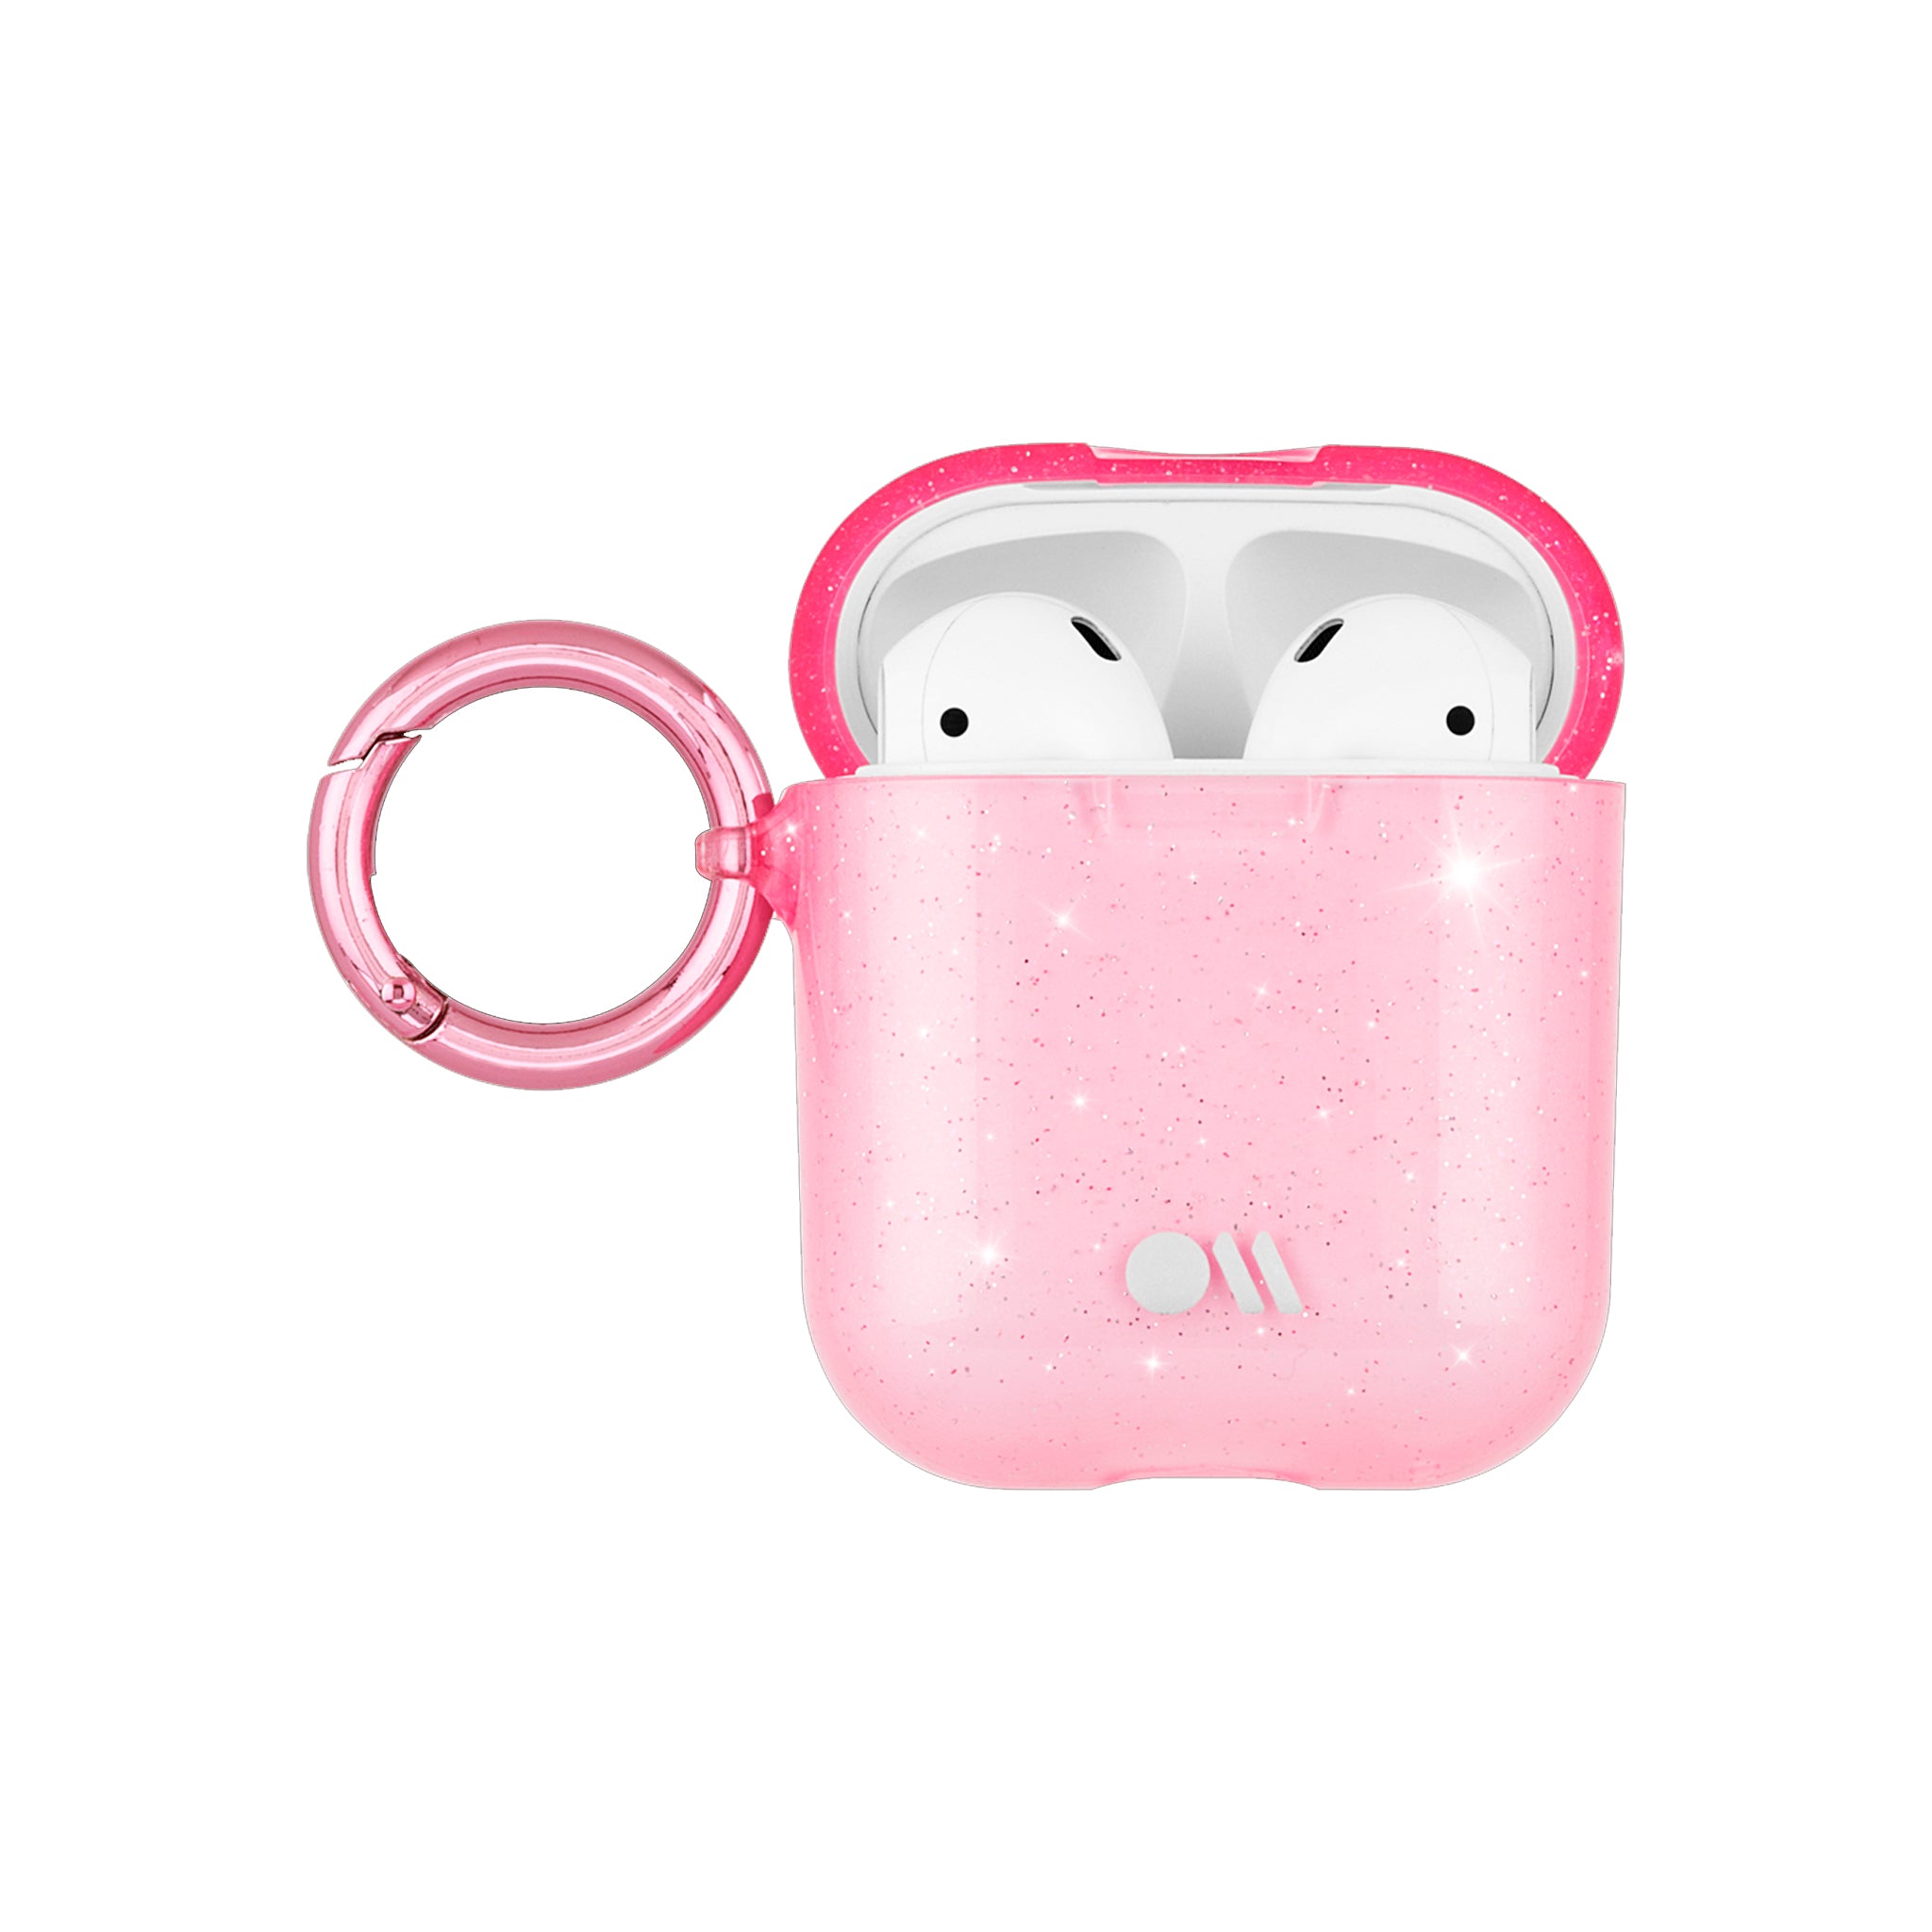 Case-mate - Hook Ups Case With Neck Strap For Apple Airpods - Blush